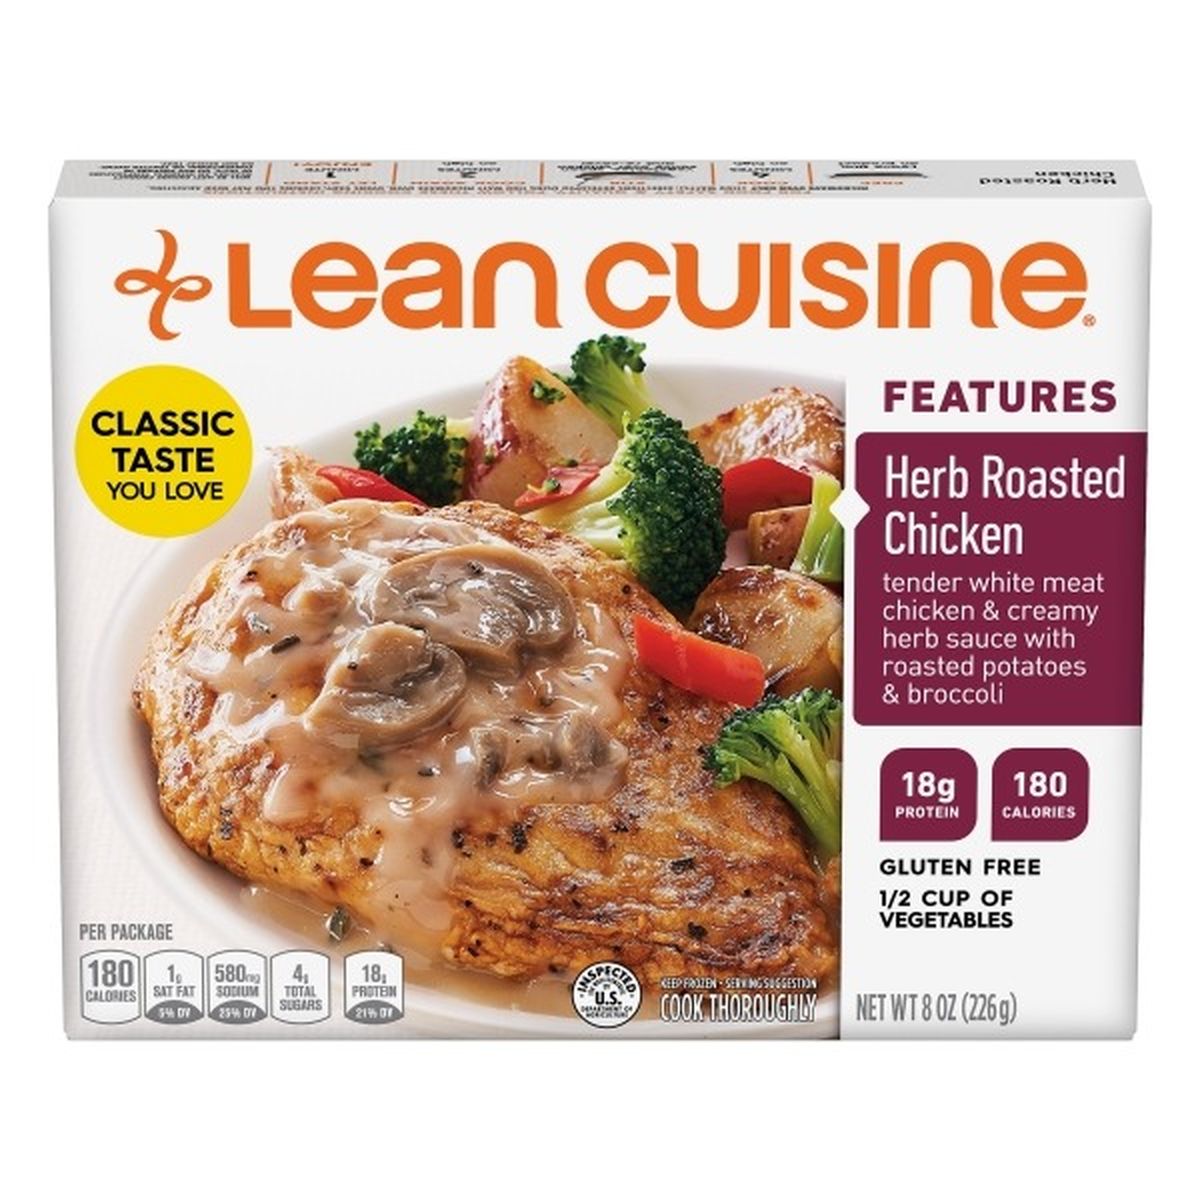 Calories in Lean Cuisine Features Herb Roasted Chicken